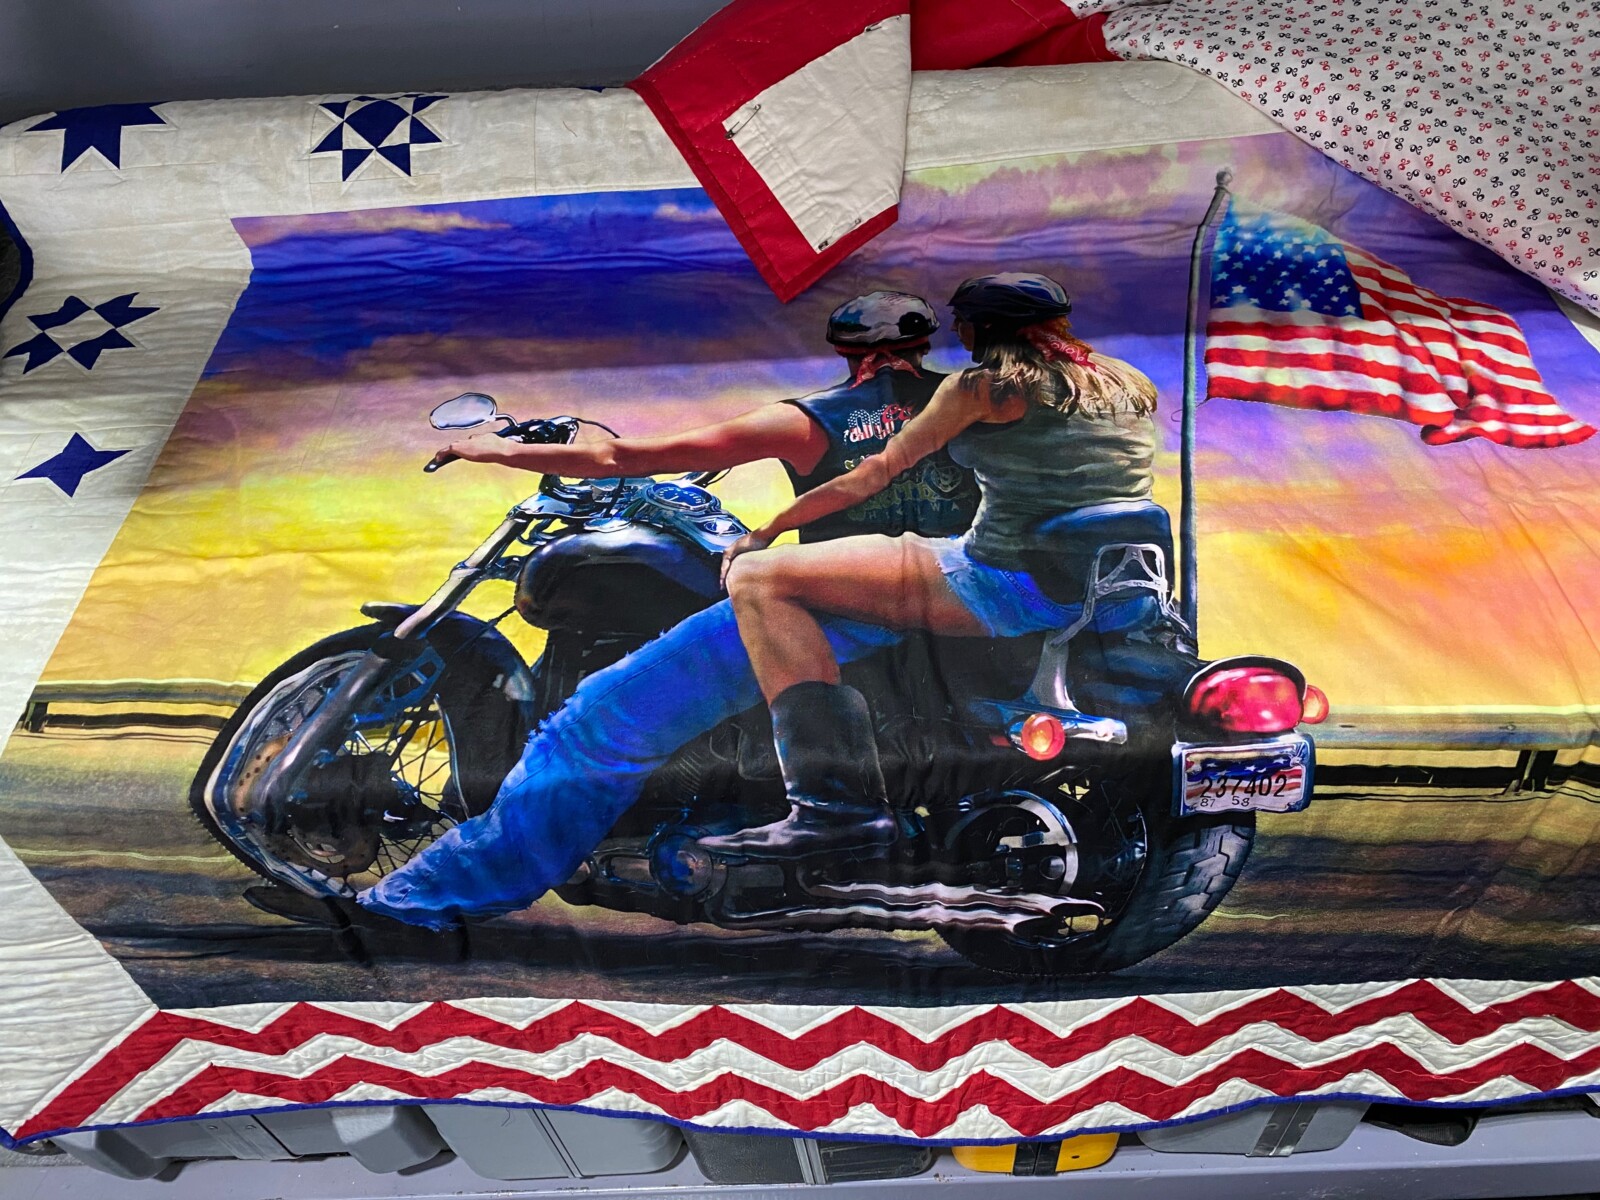 Motorcycle Theme American flag Quilt